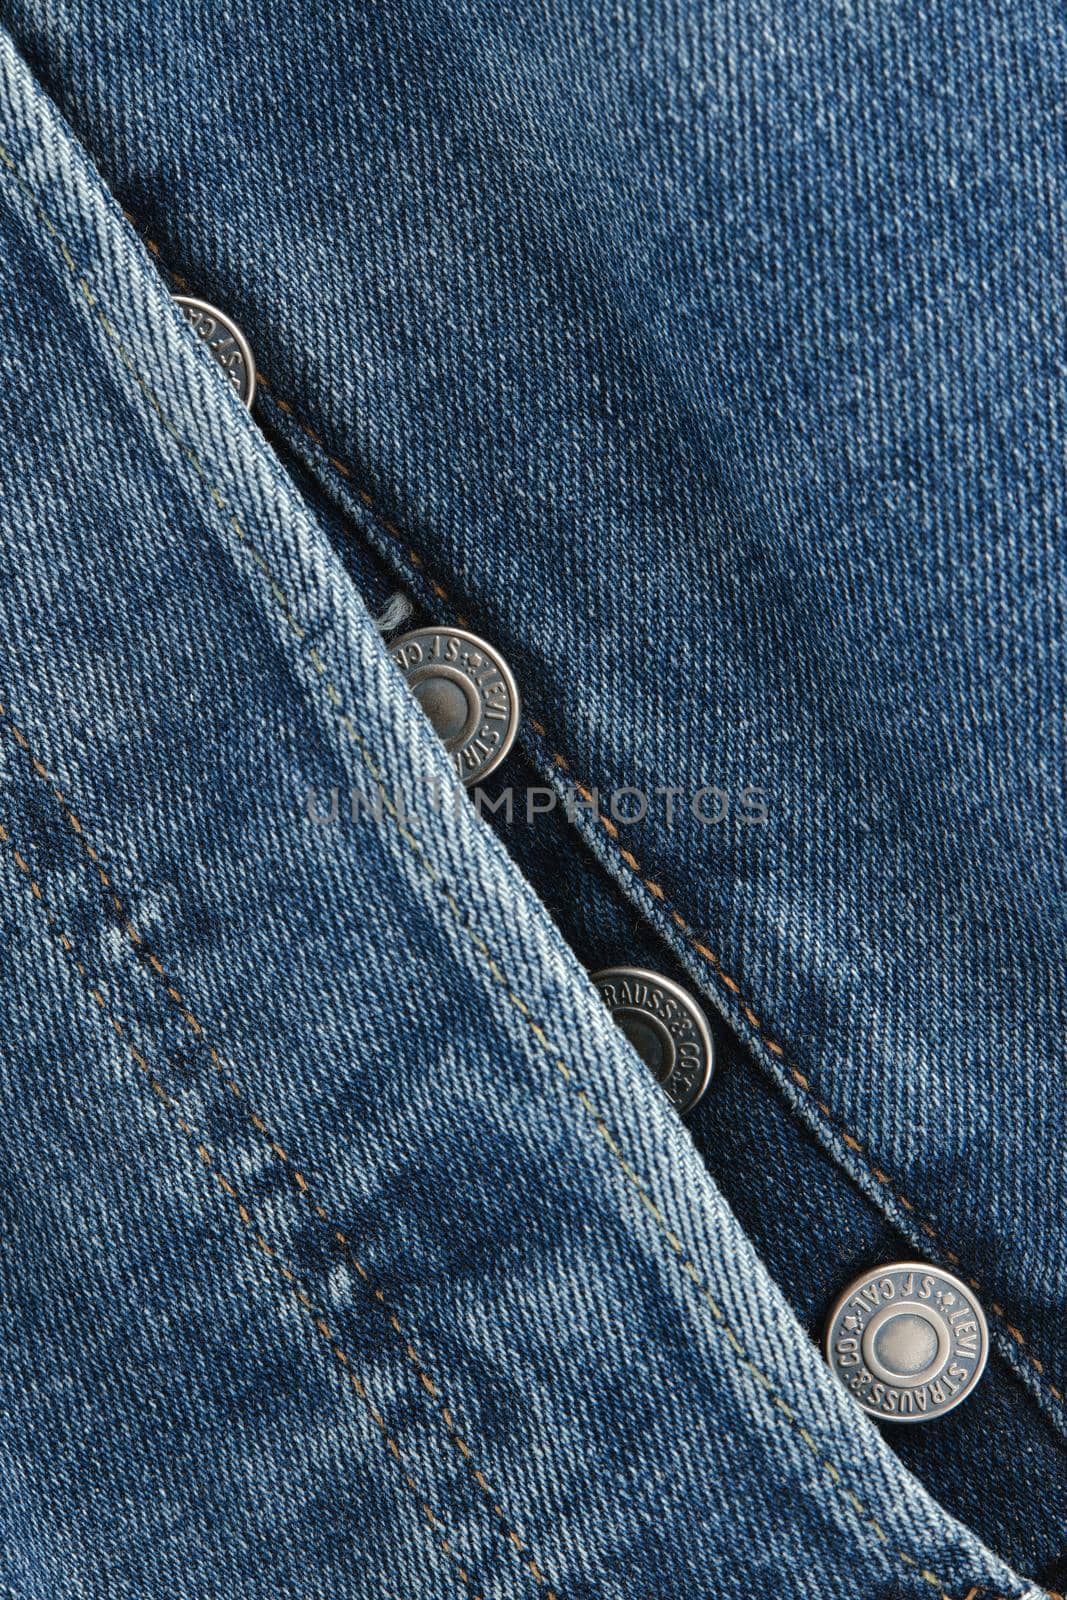 Close up of the details of new LEVI'S 501 Jeans. Buttons and seams close-up. Classic jeans model. LEVI'S is a brand name of Levi Strauss and Co, founded in 1853. 31.12.2021, Rostov, Russia.